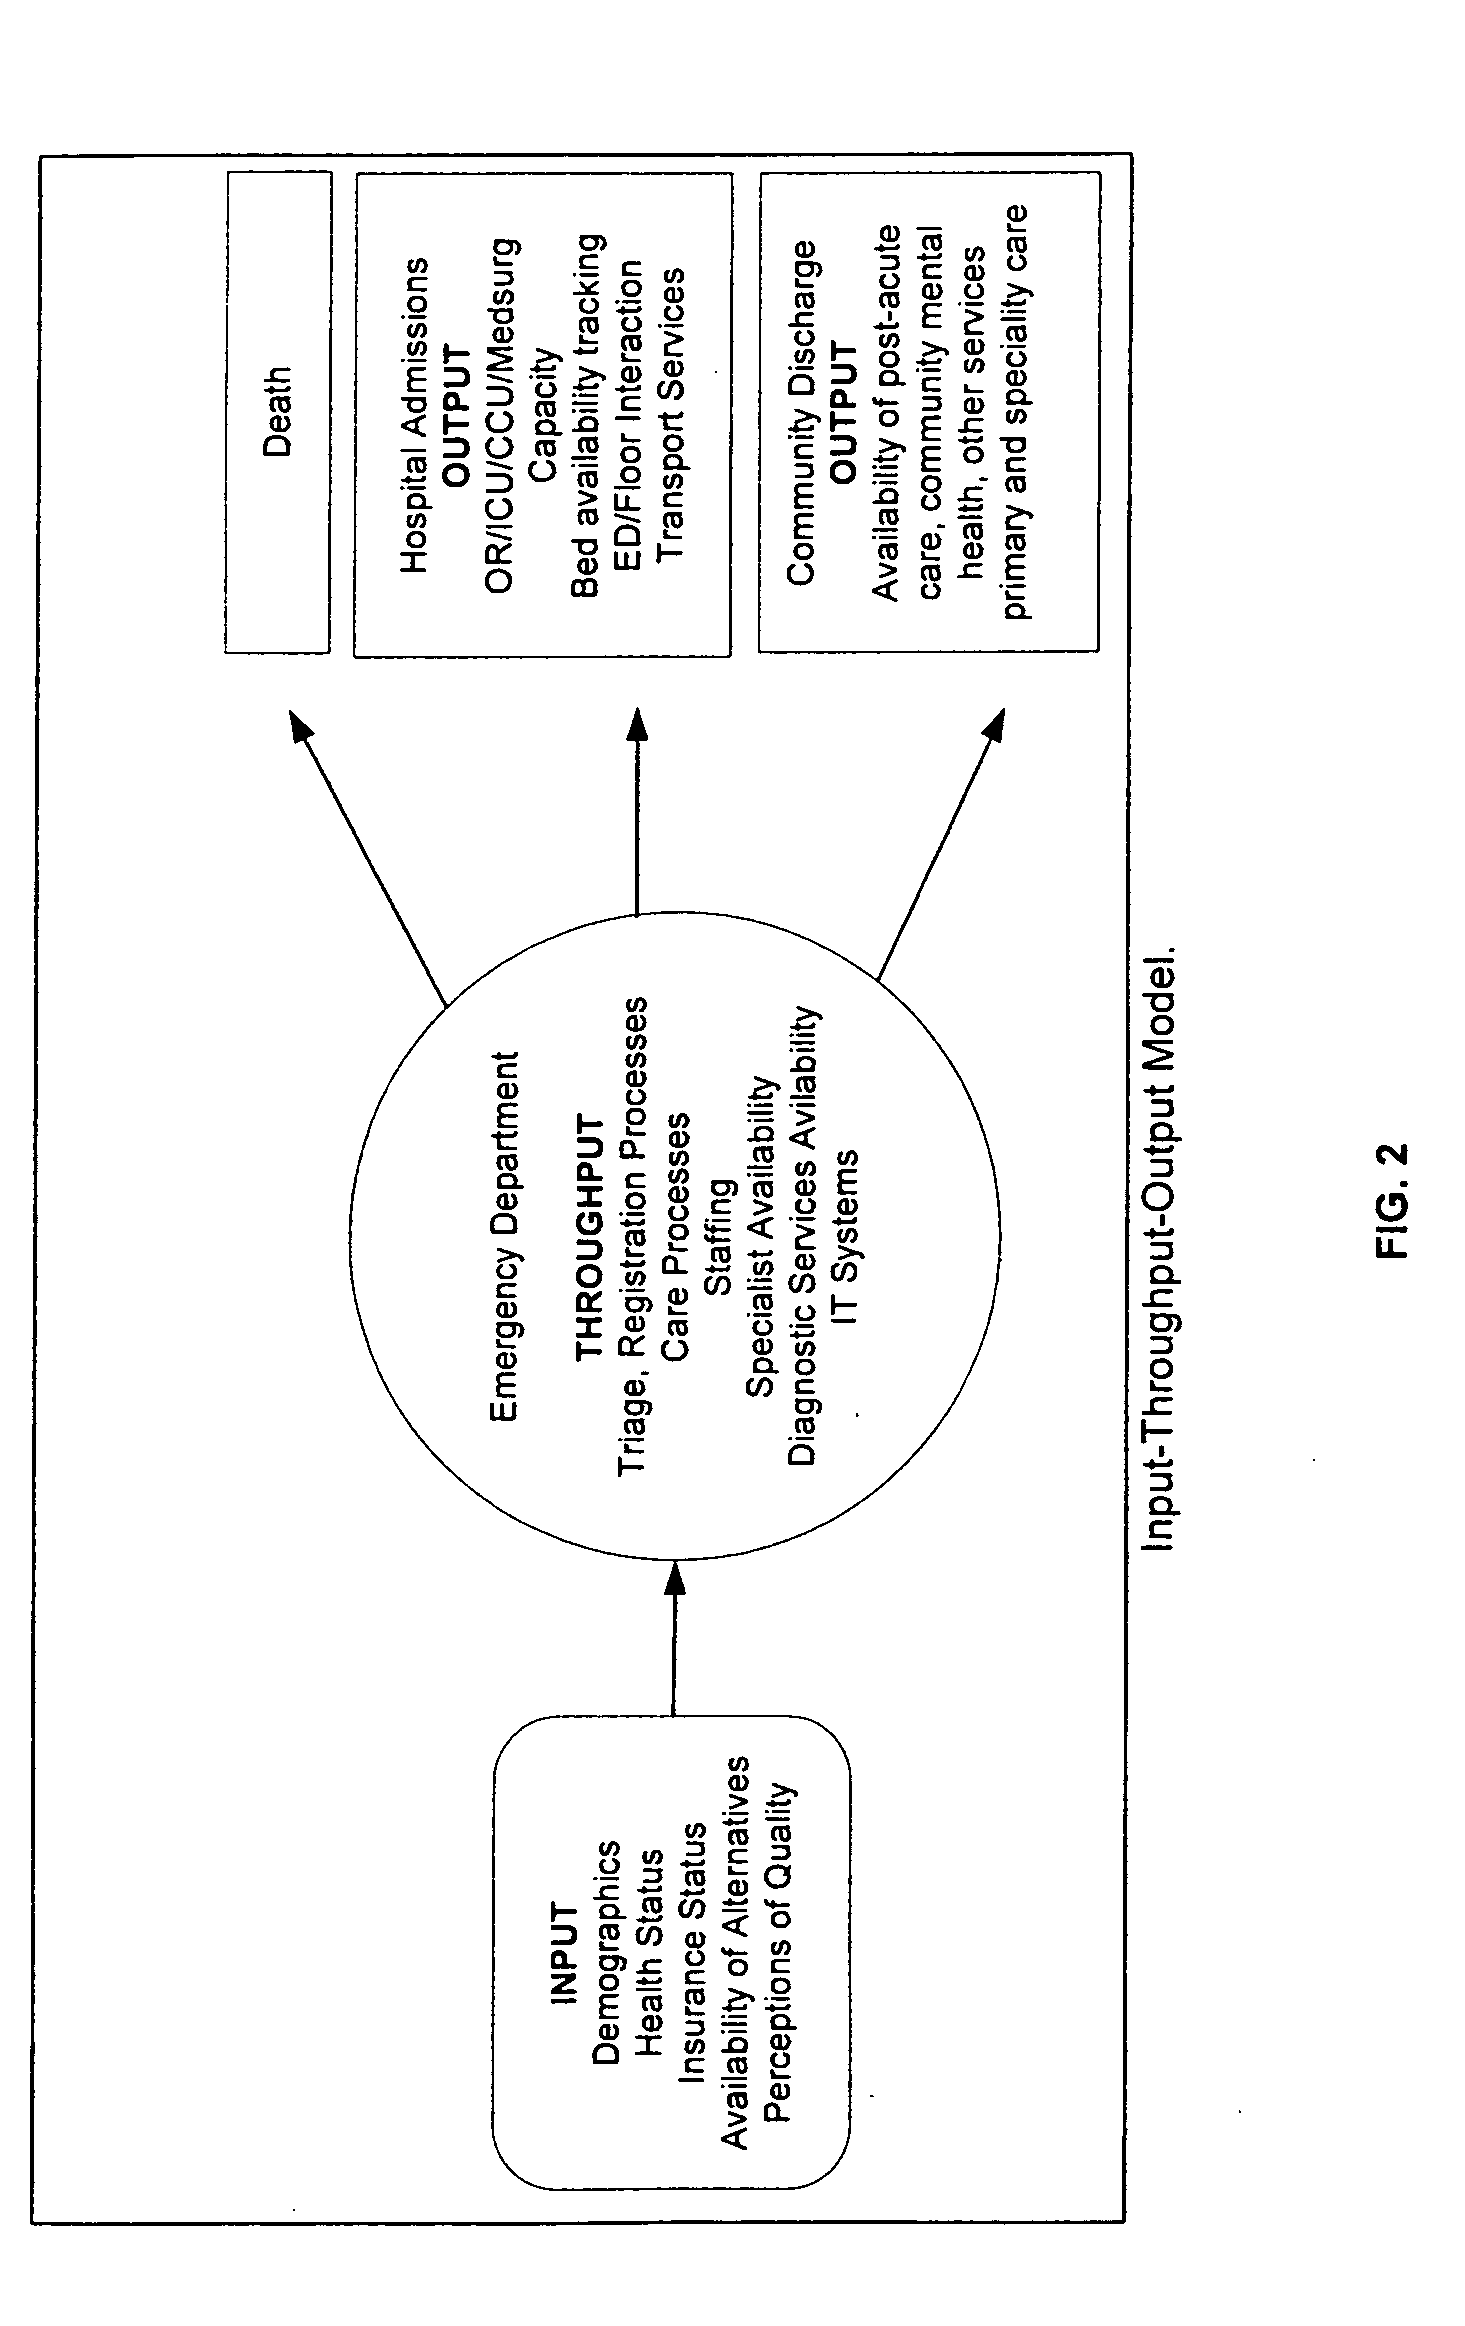 System and method for indexing emergency department crowding